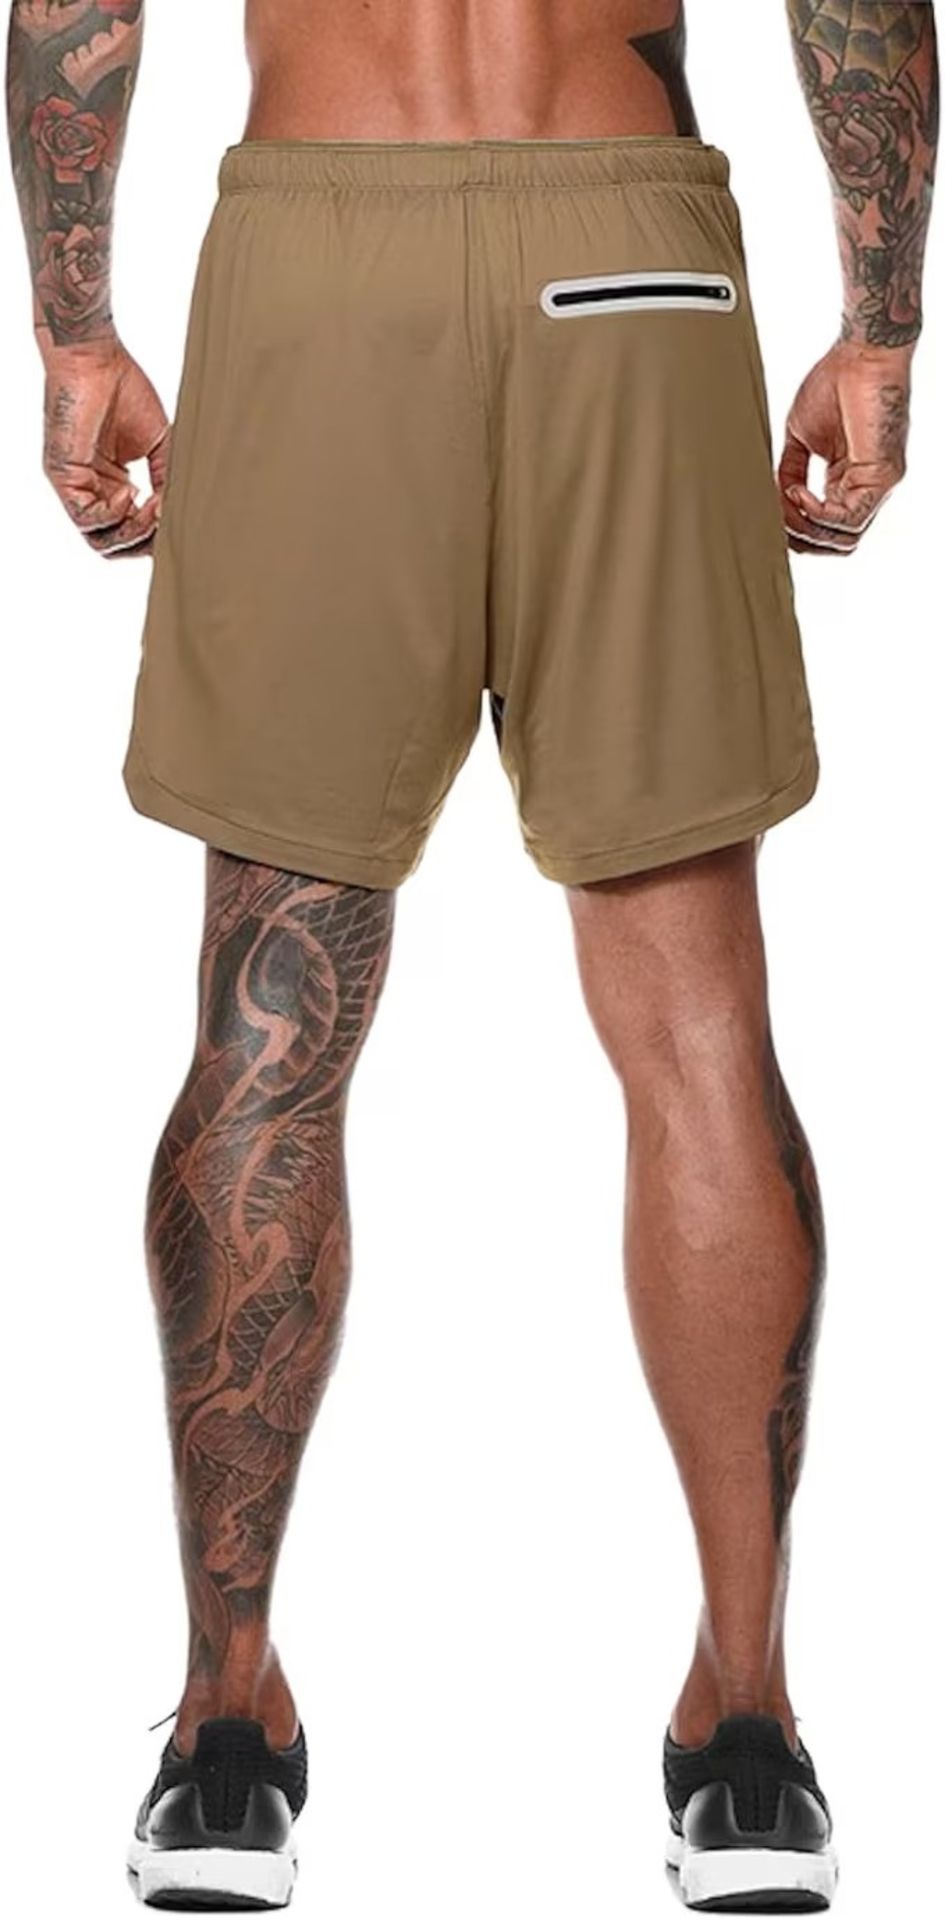 [NEW] Men's Workout Gym Shorts 2-in-1 Running Shorts Training Short with Inner Compres - Image 2 of 2